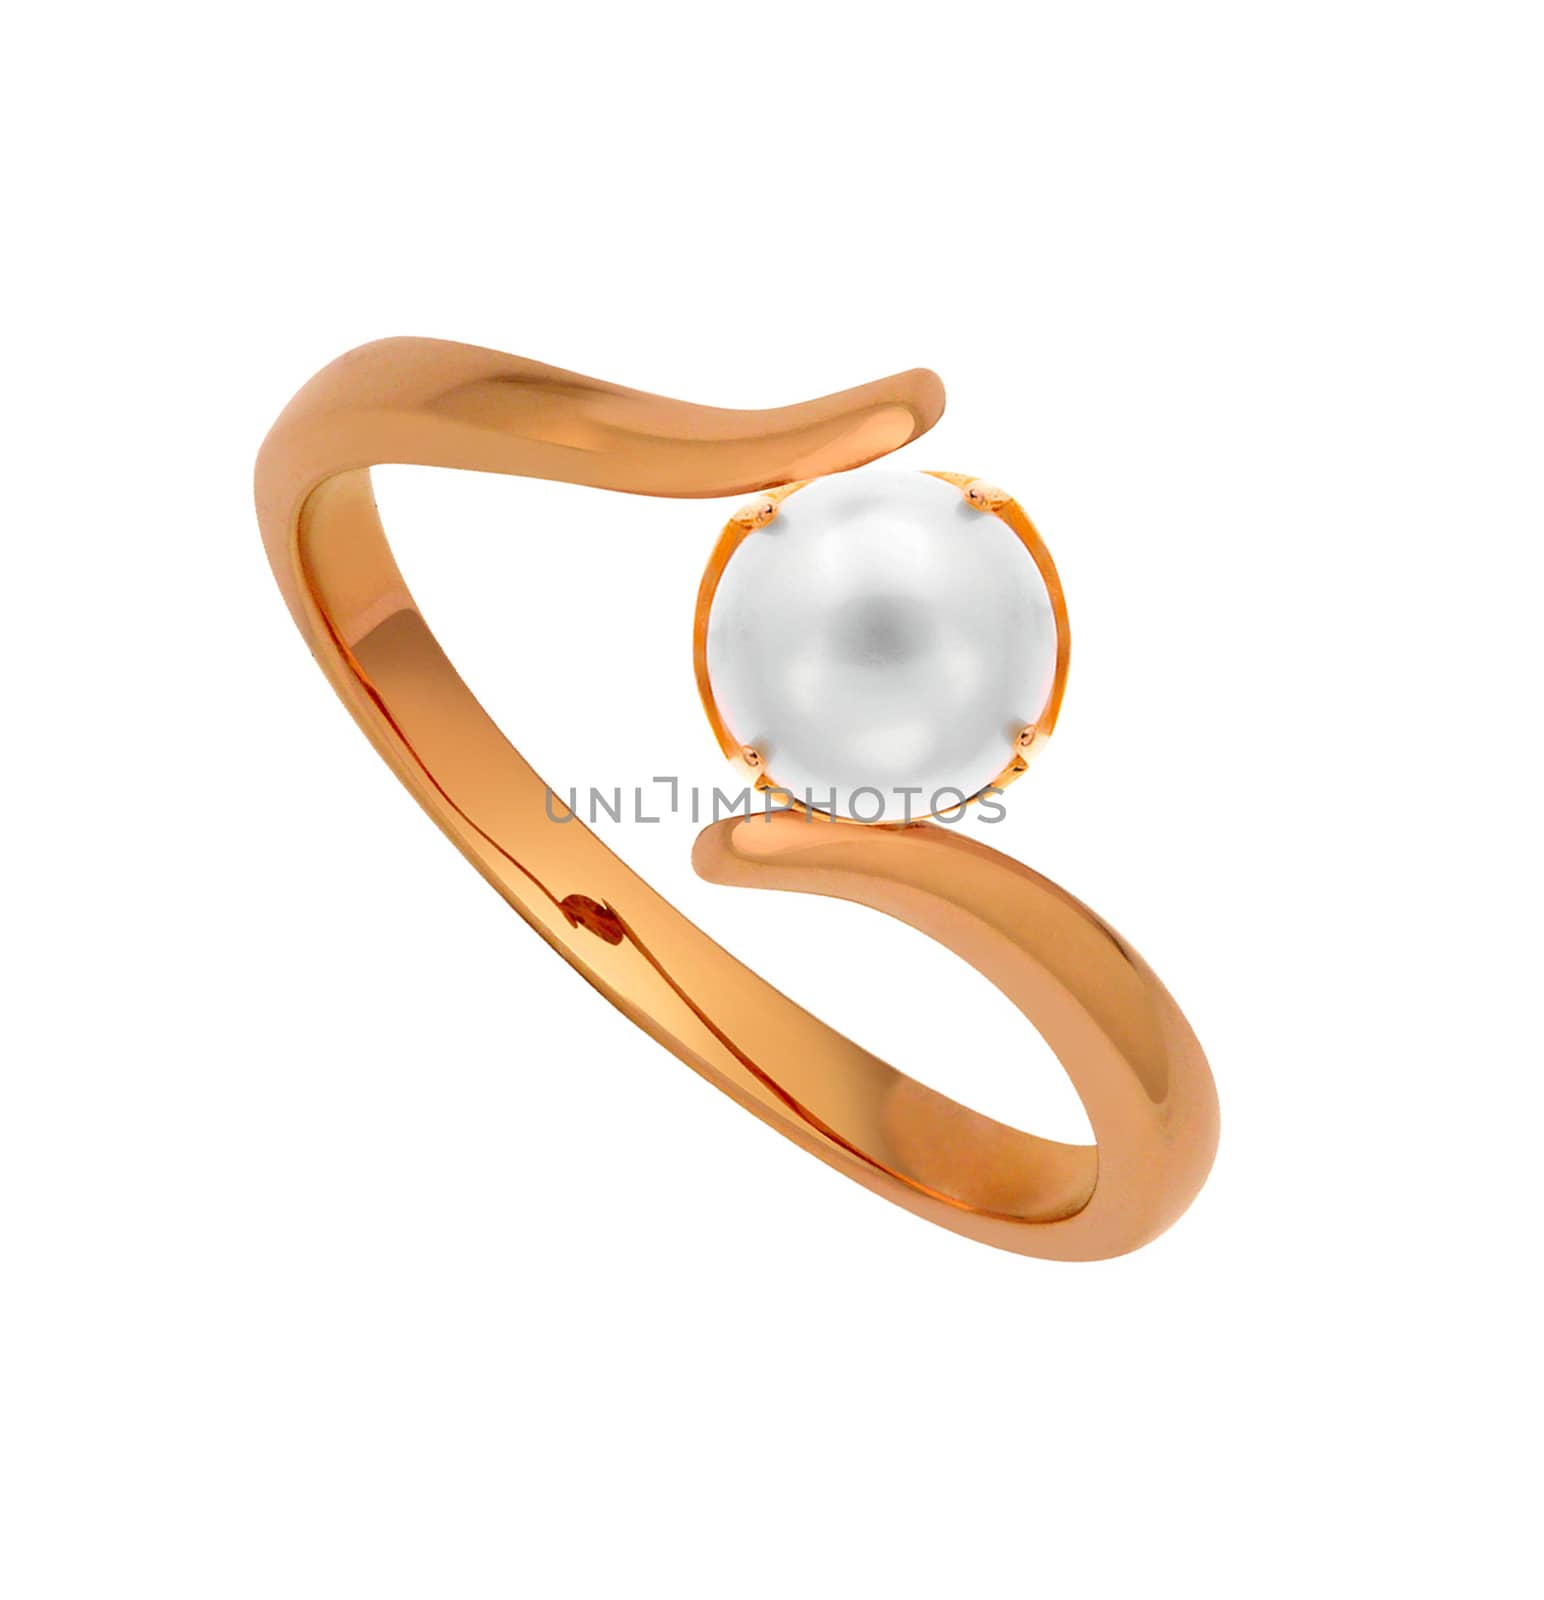 Gold ring with pearl on white